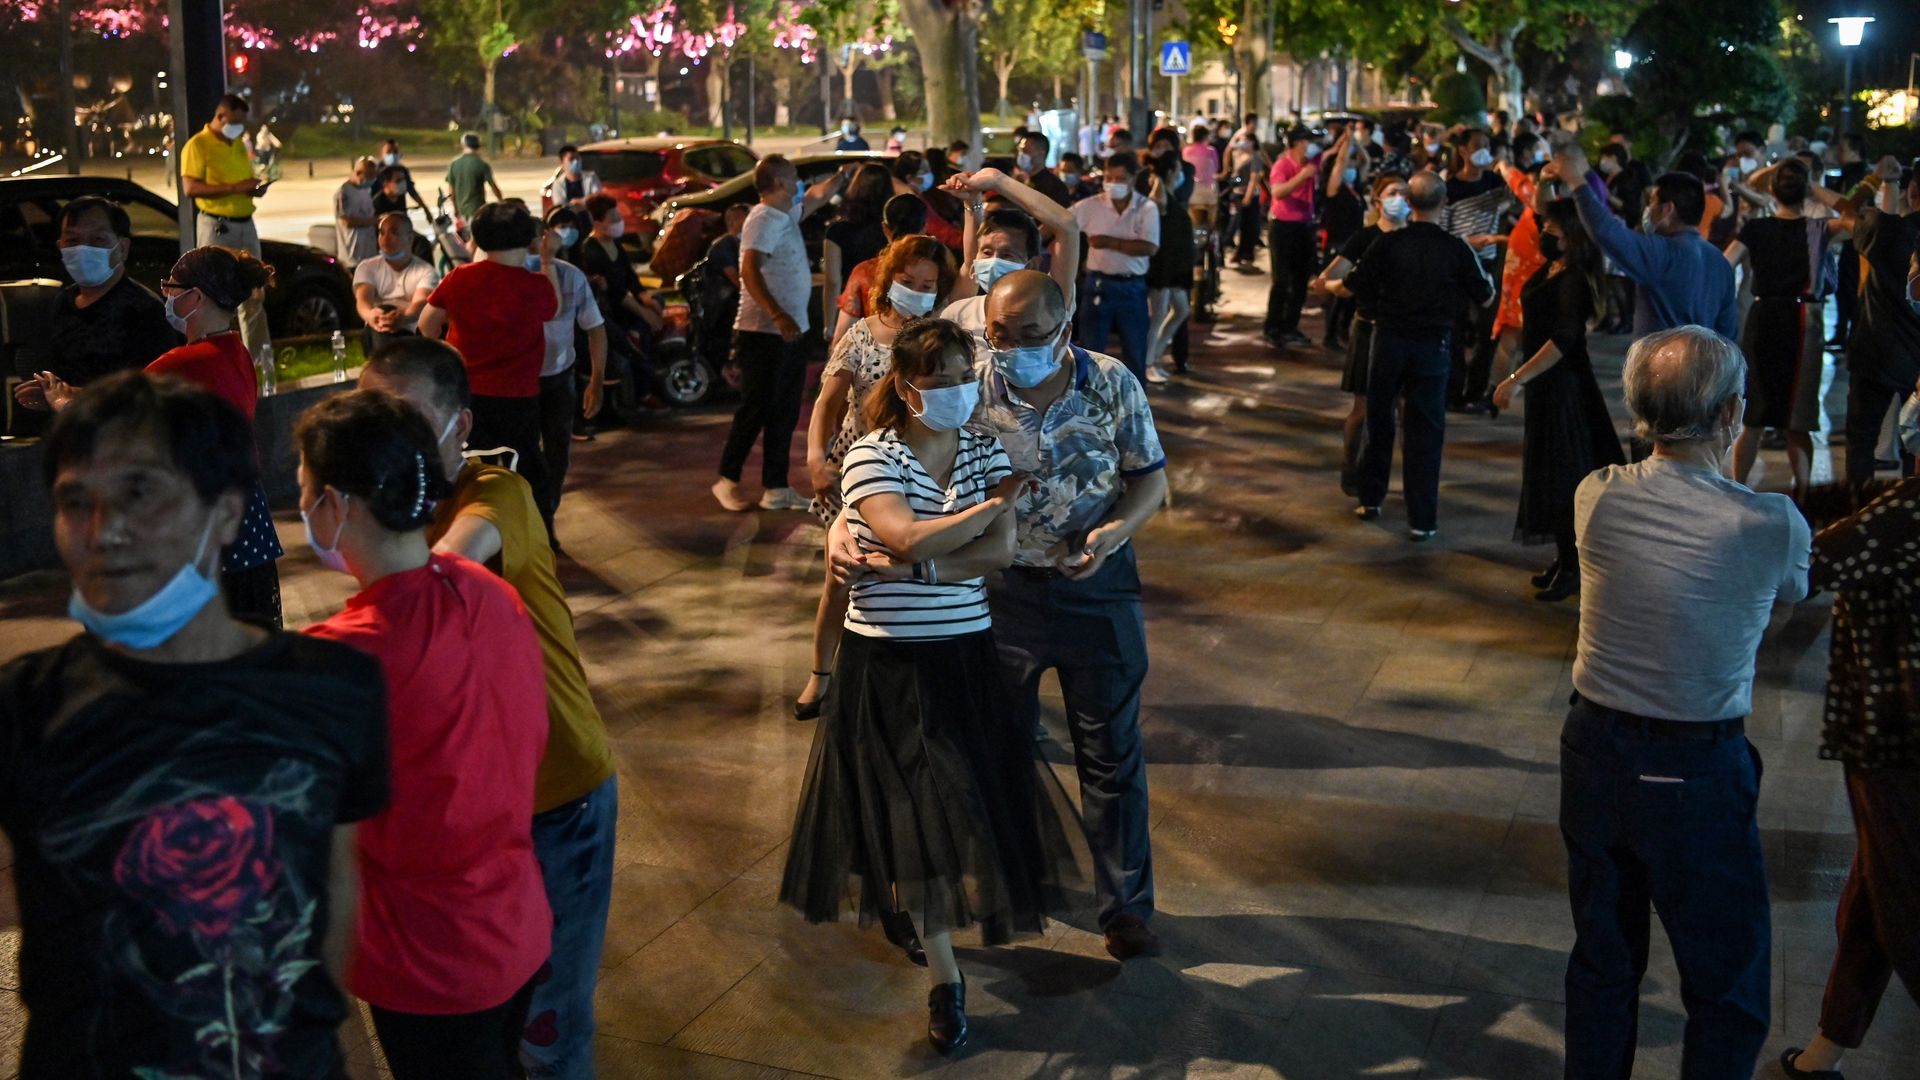 In this image, a man and a woman dance together outside while wearing face masks